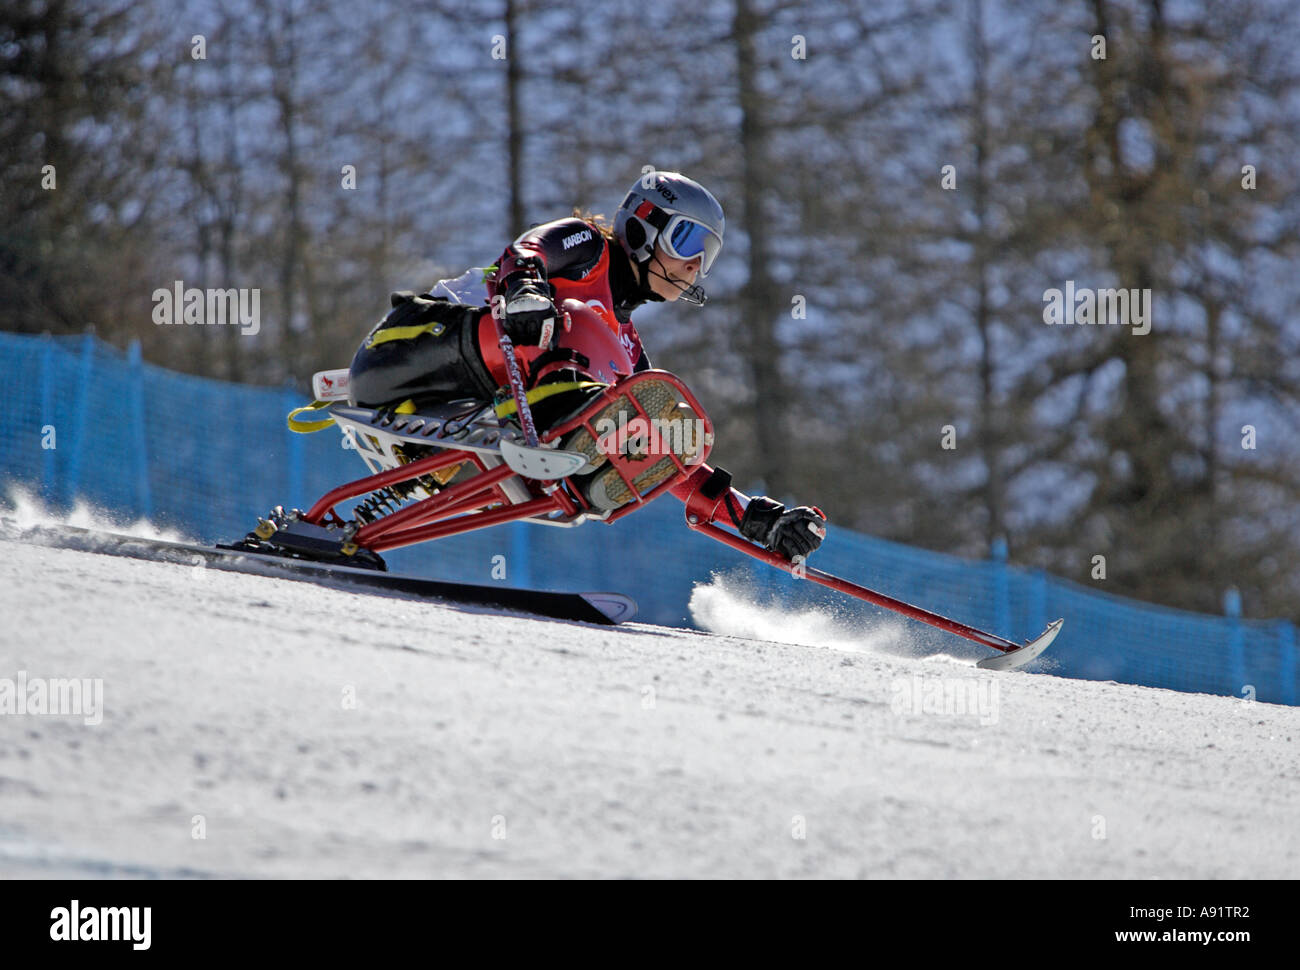 Kimberley Joines LW12 1 of Canada in the Womens Alpine Skiing Super G Sitting competition on her way to winning the bronze medal Stock Photo